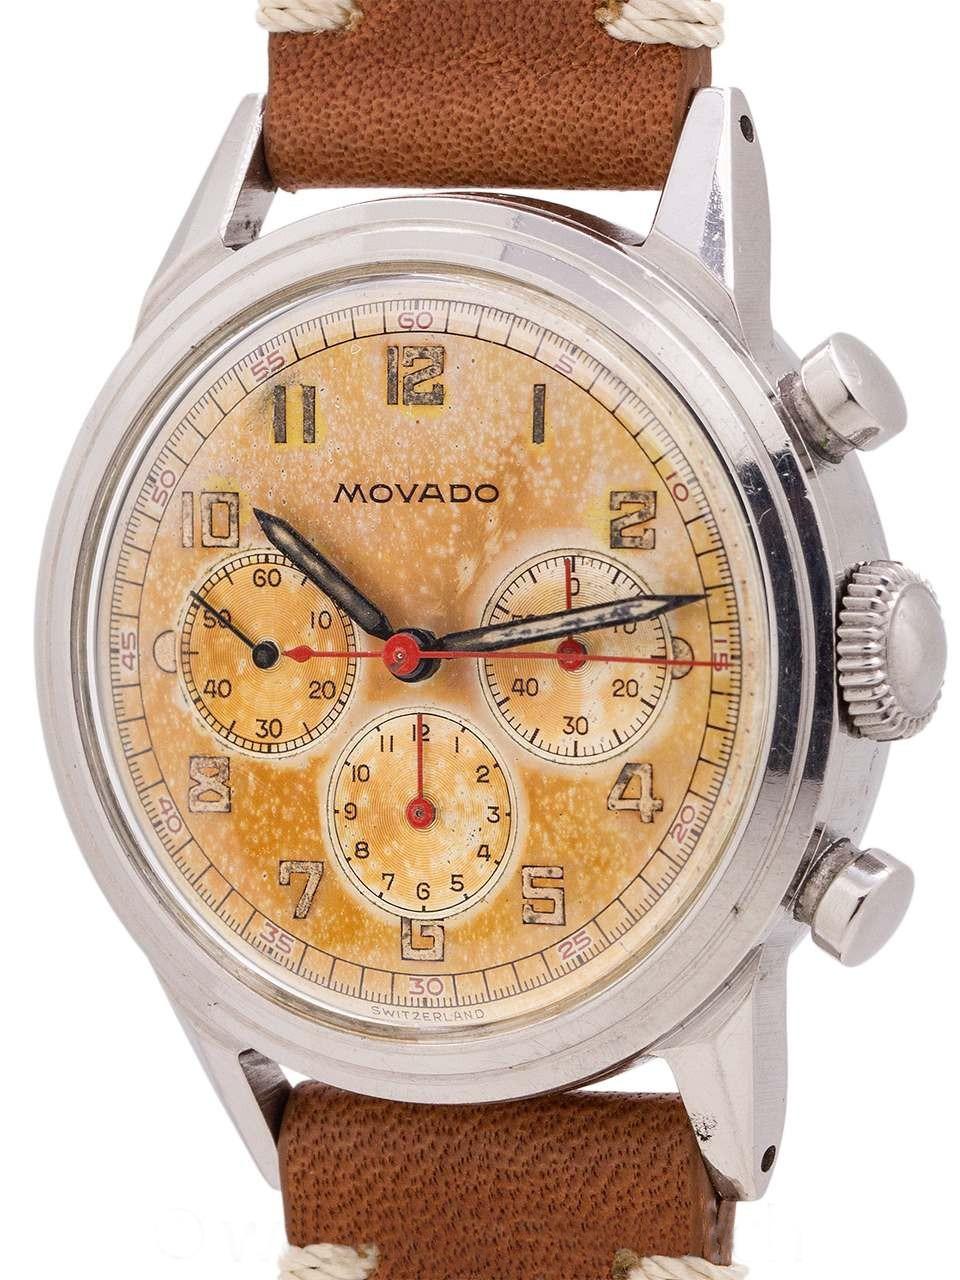 Brand:Movado
Model:Vintage “Sunburst” Chronograph
Gender:Men
Period:1950-1959
Movement:Mechanical hand winding
Case material:Steel
Extras:No Box & No Papers
Type:Chronograph wristwatch
Shipped Insured:Yes
Condition:In working condition with visible